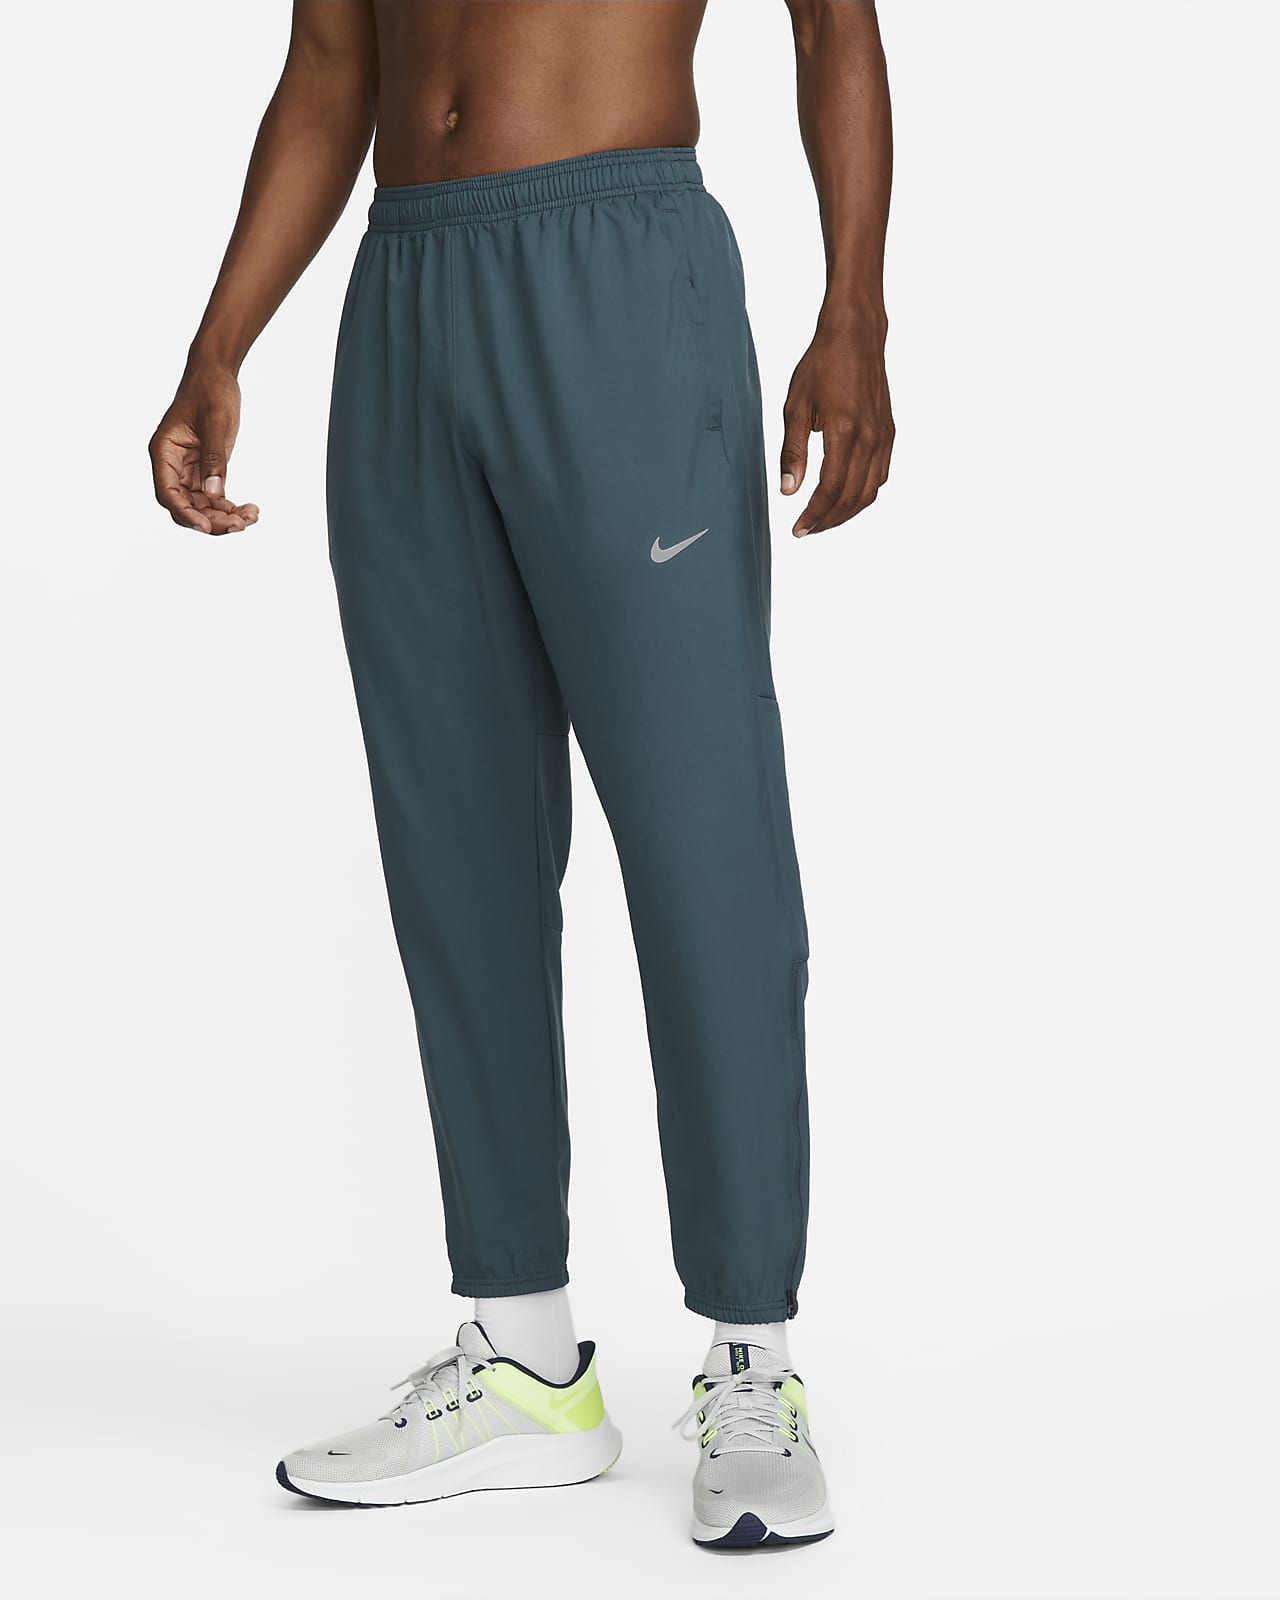 I. Introduction: The Importance of Choosing the Right Running Pants